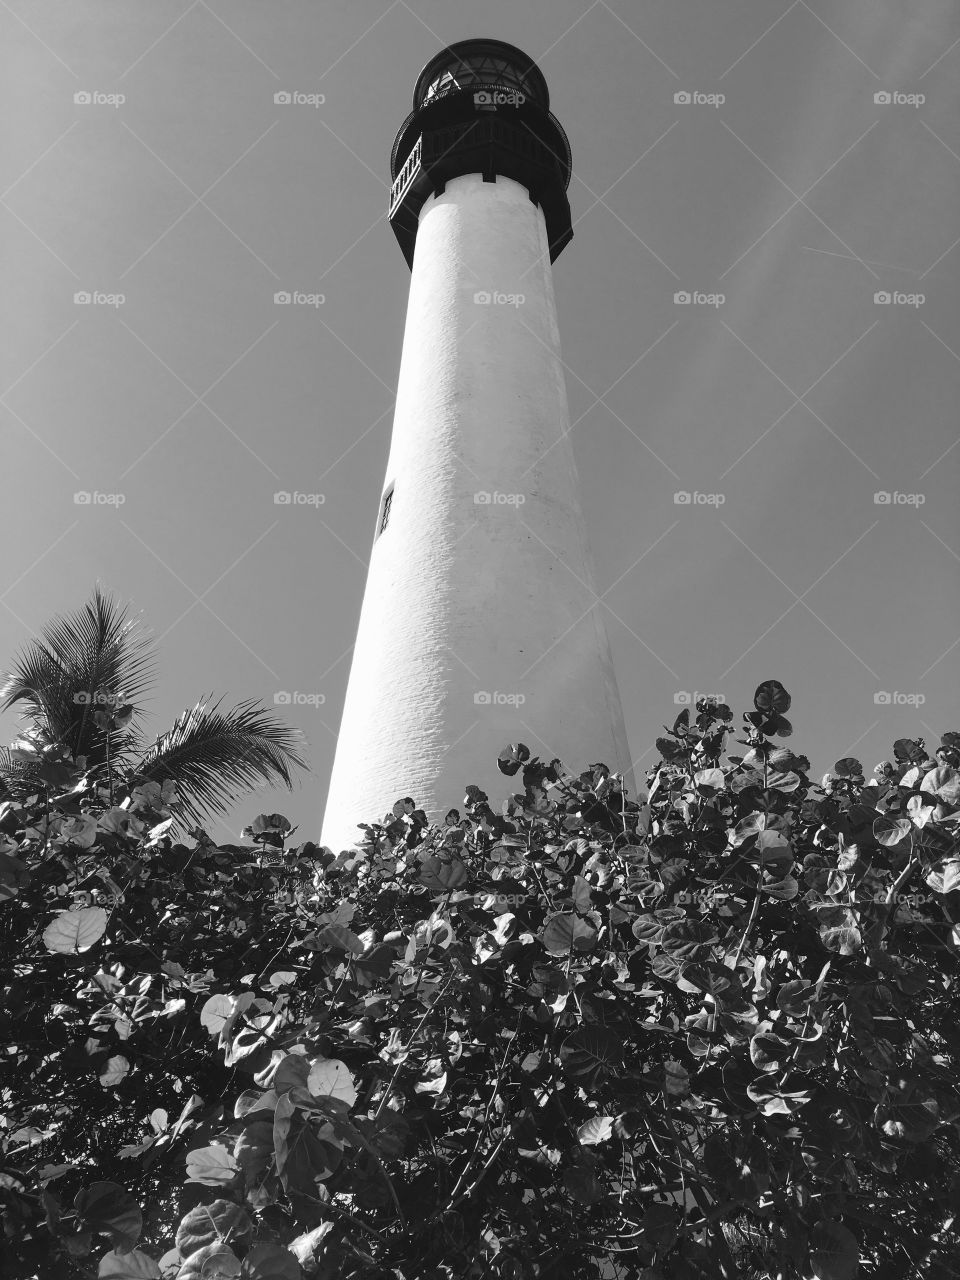 Black and white lighthouse.